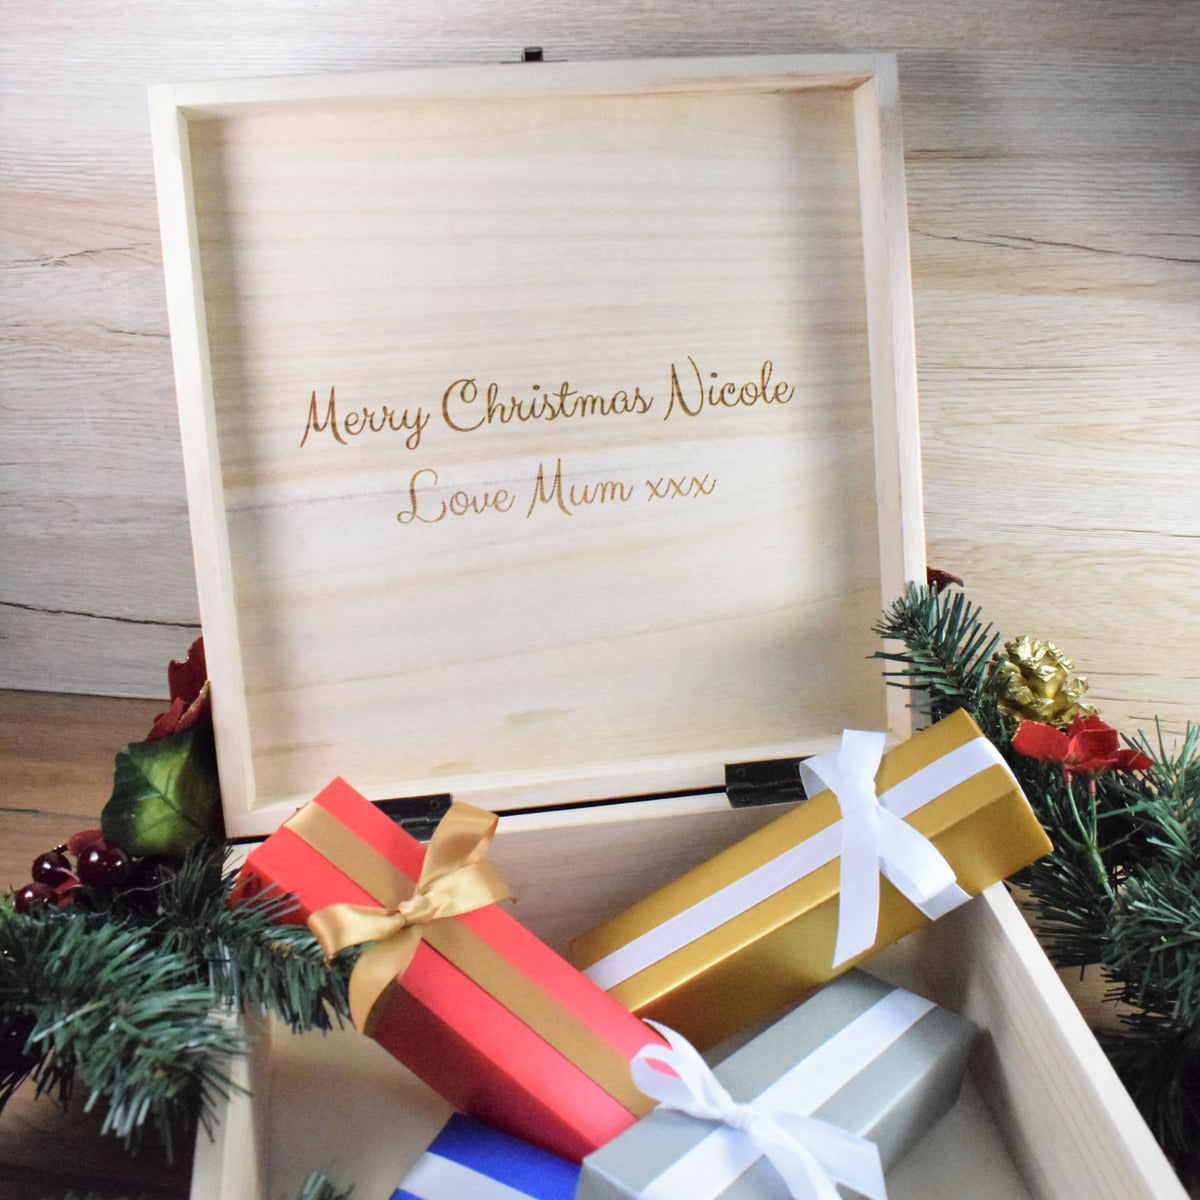 Personalised Wooden Christmas Eve Box - Twas the Night Before Christmas